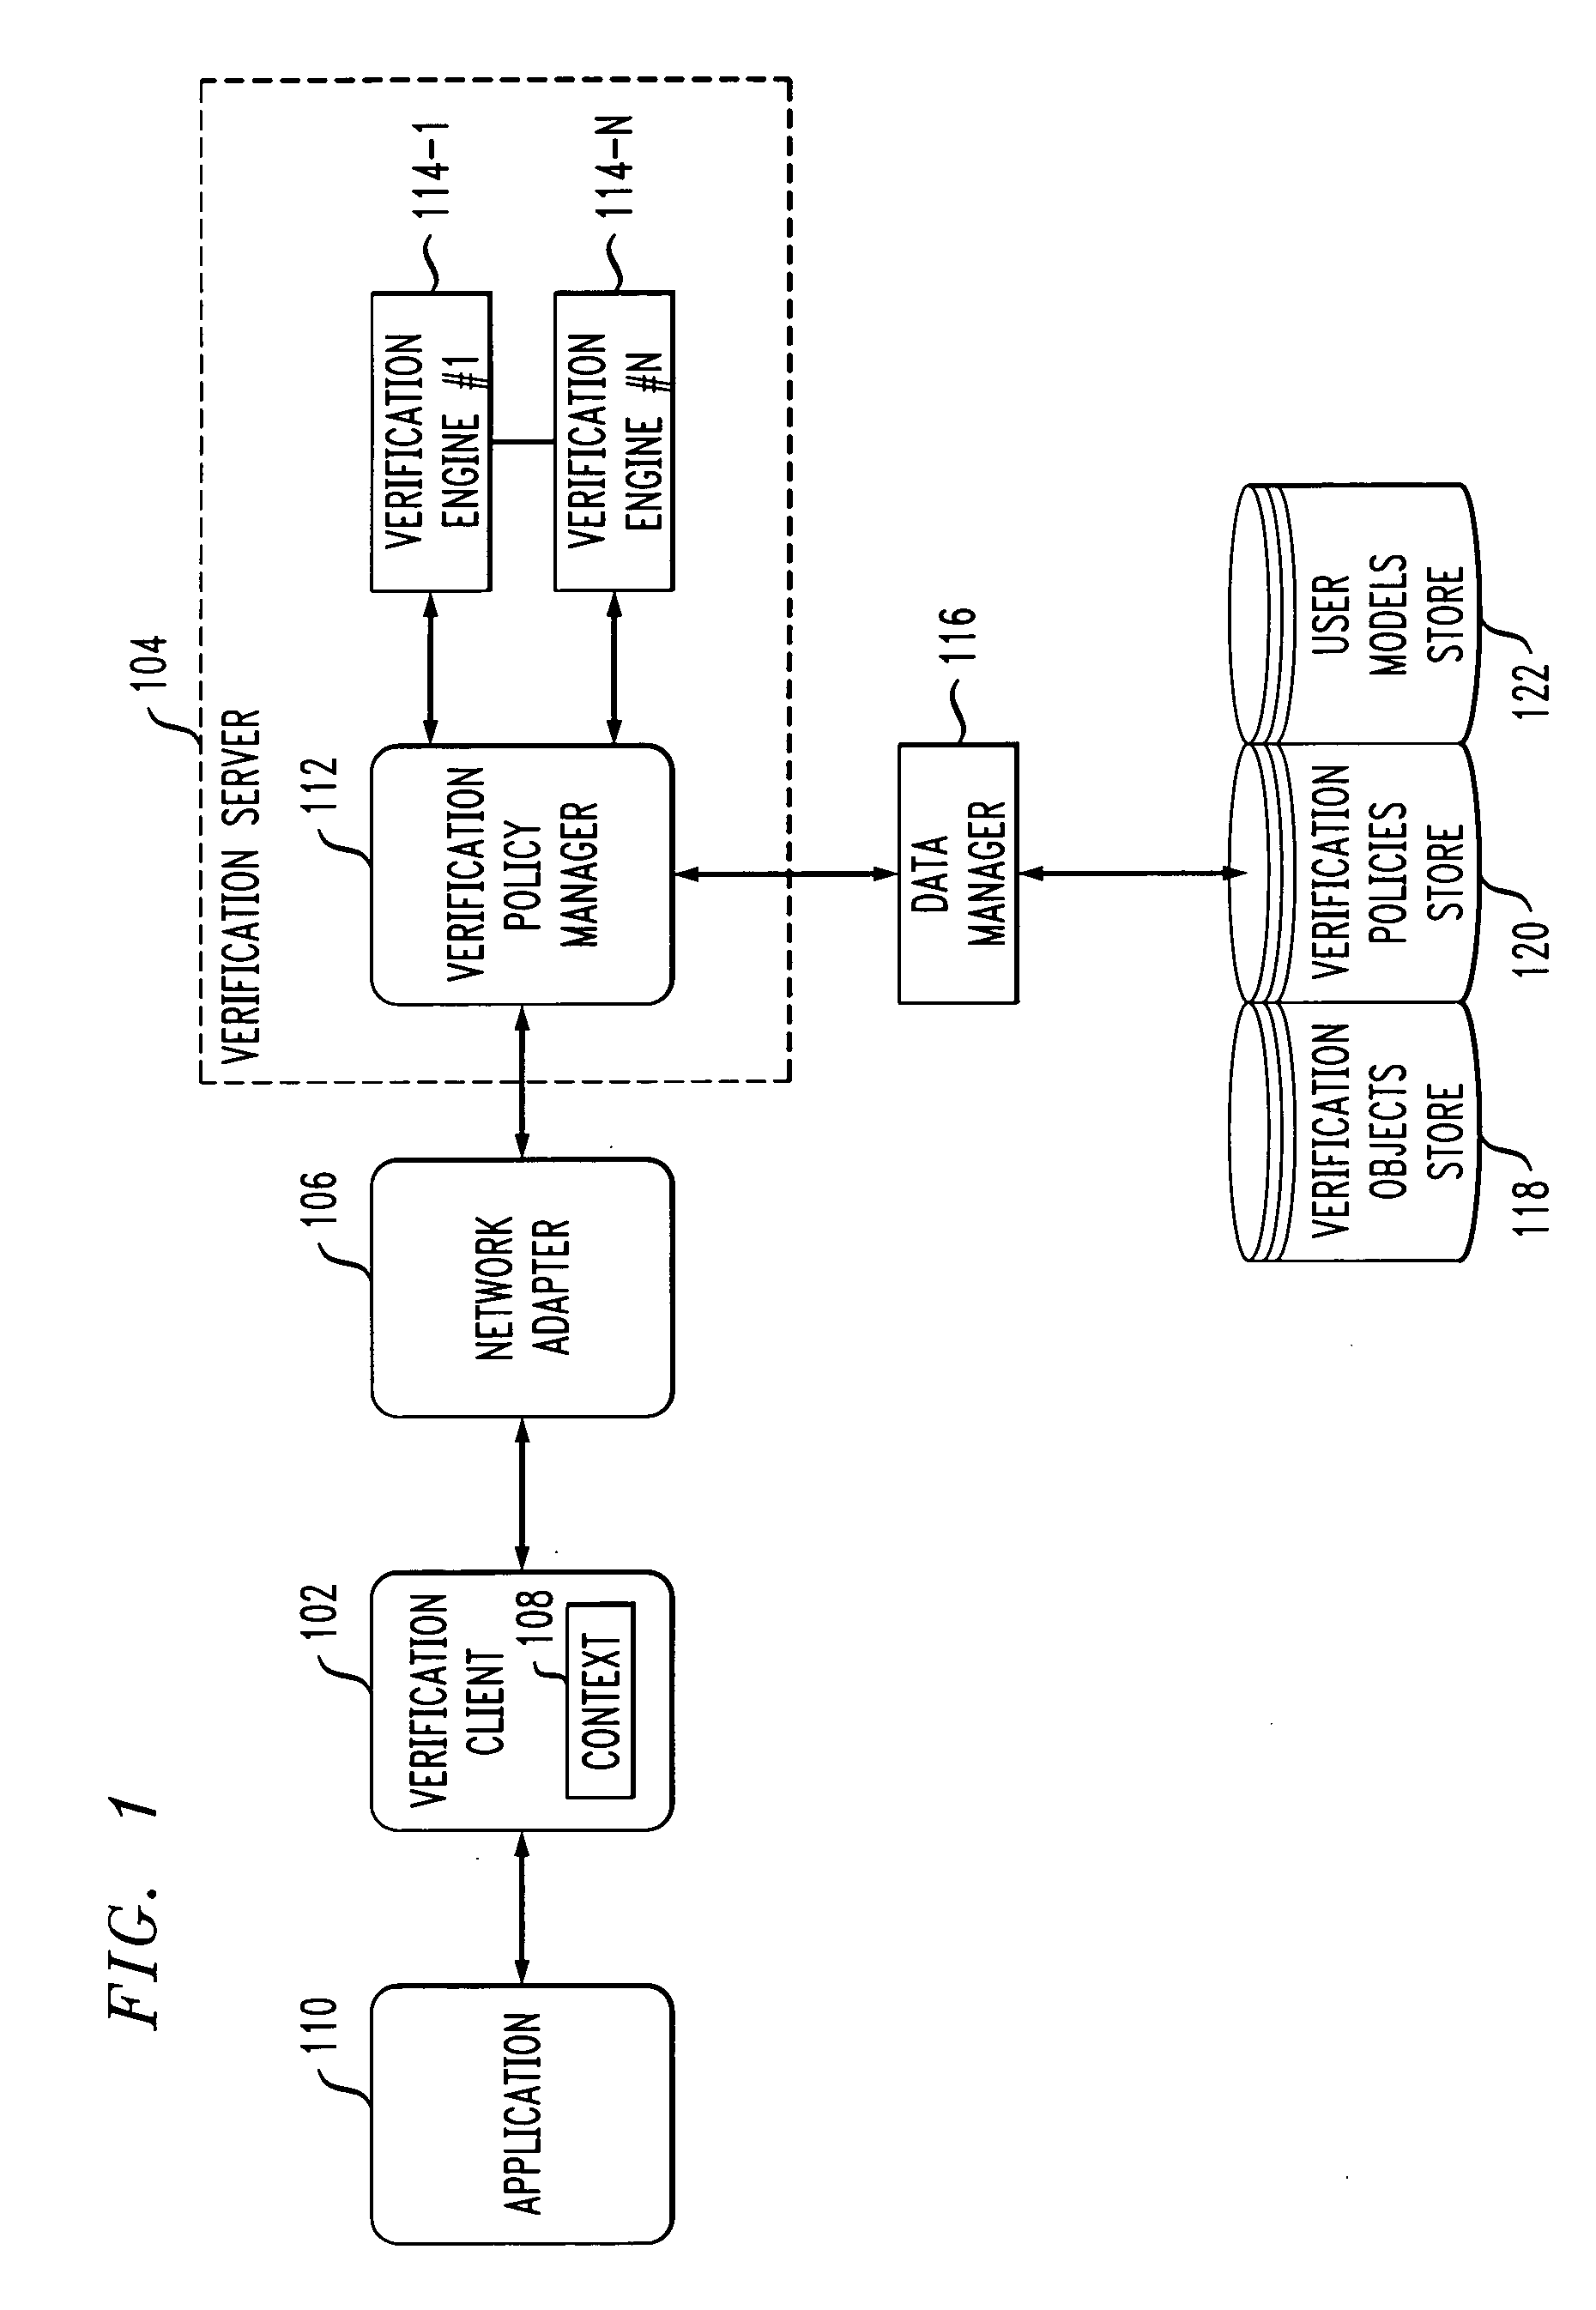 Method and apparatus for sequential authentication using one or more error rates characterizing each security challenge